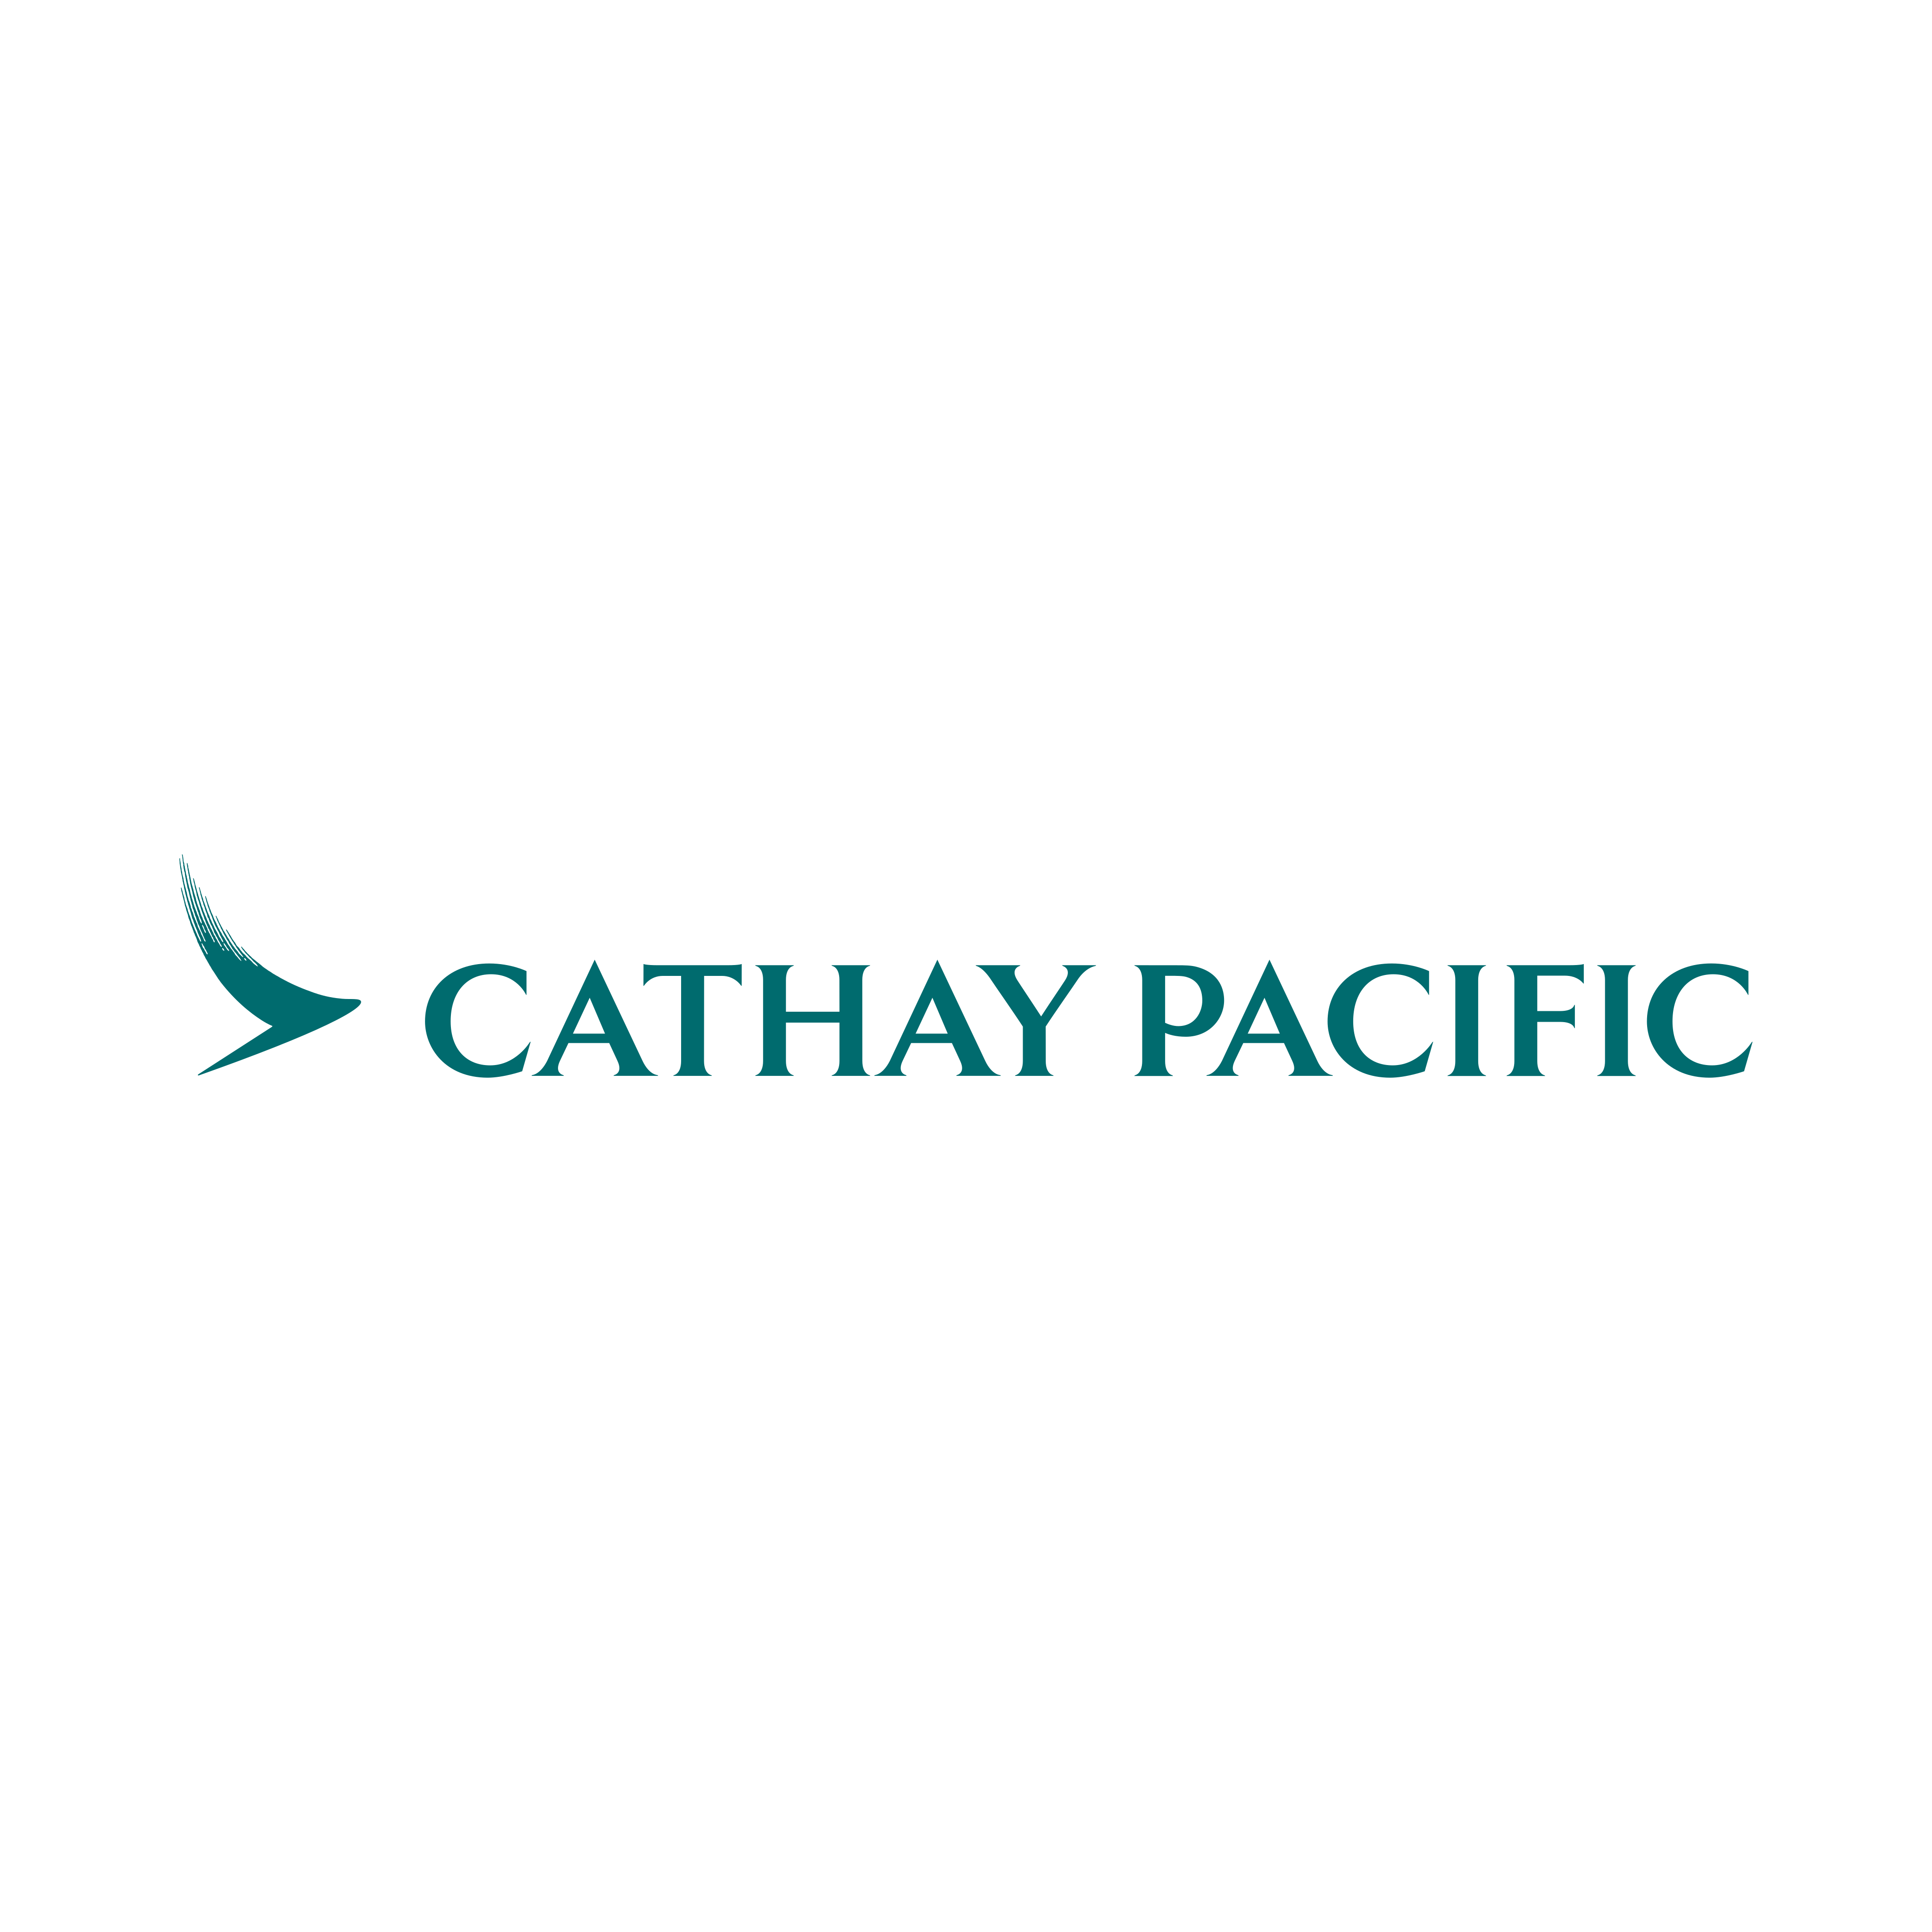 cathay pacific logo.